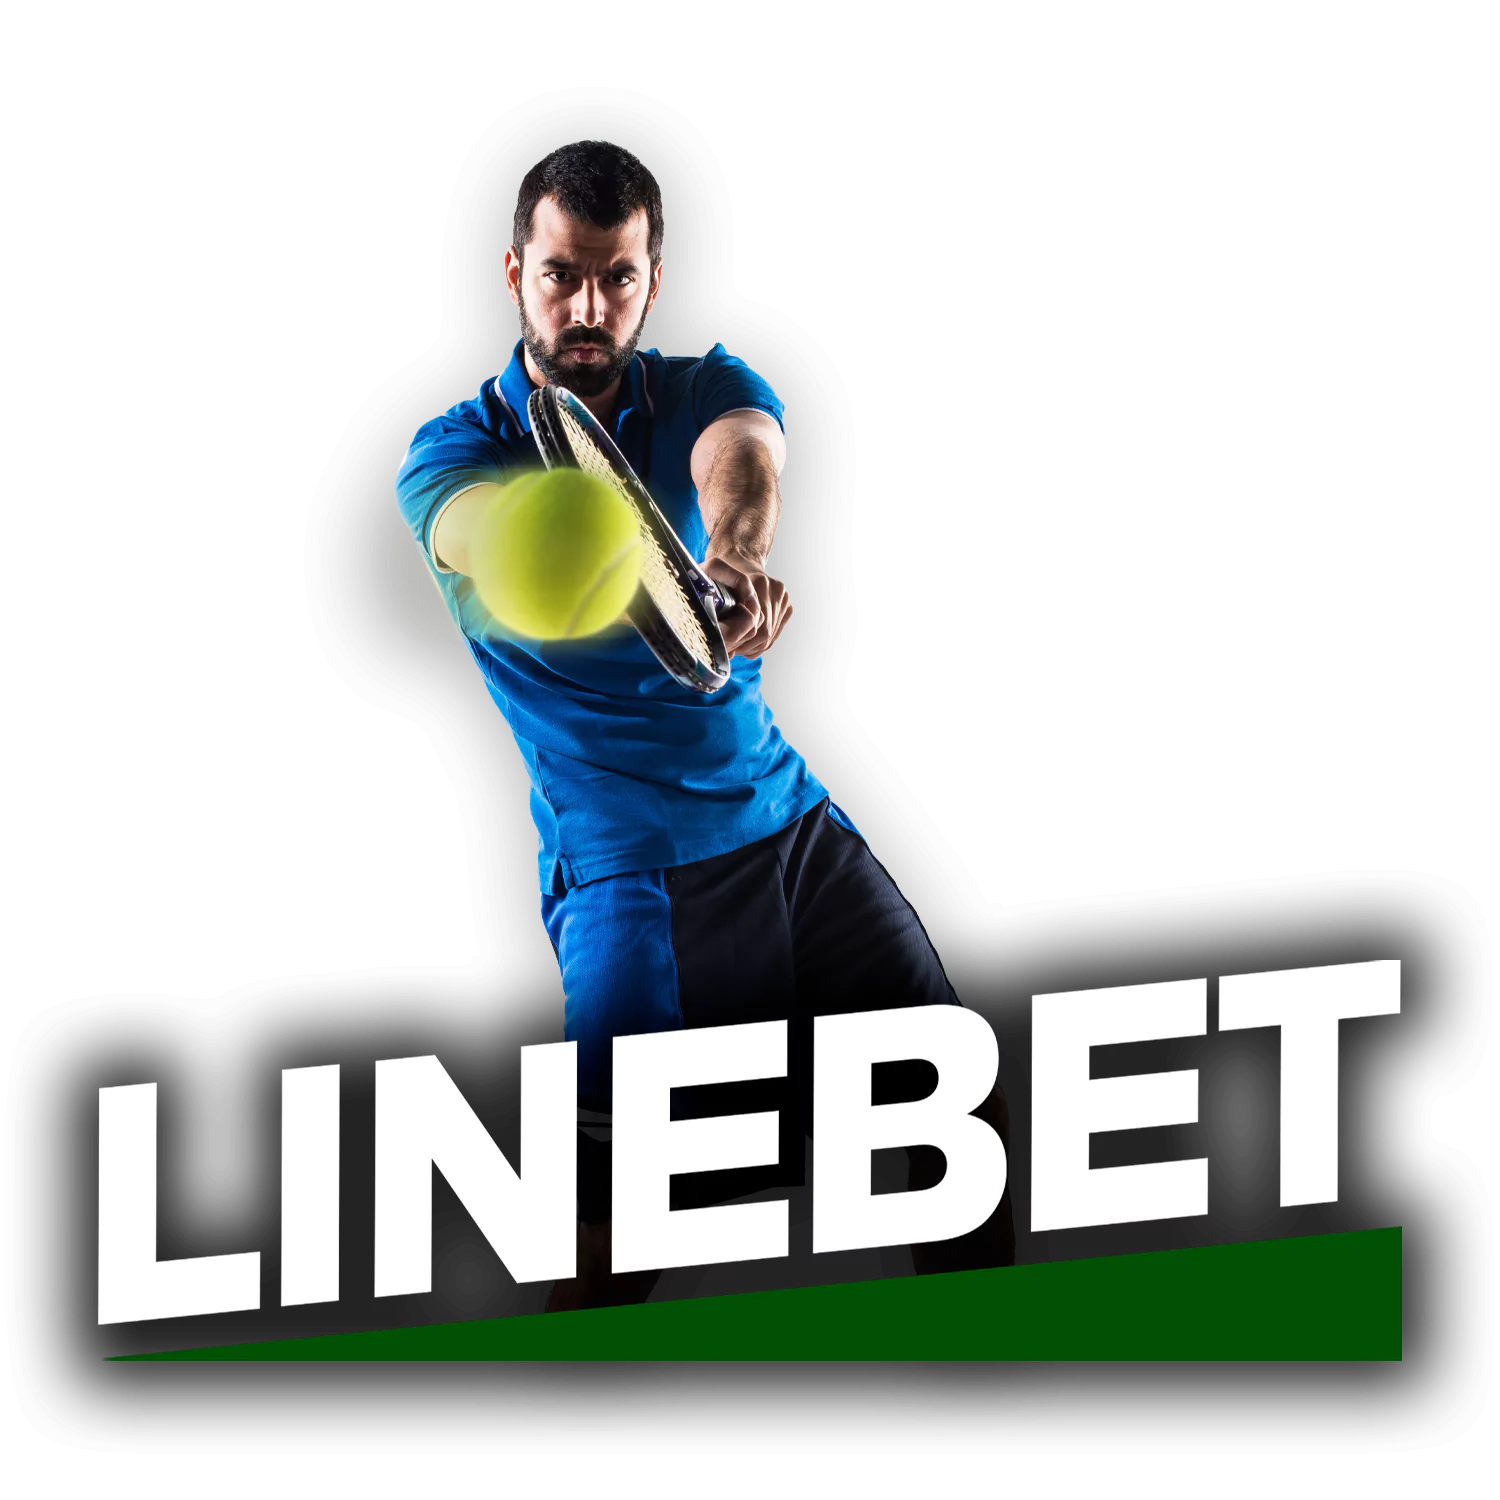 Learn how to bet on tennis matches with Linebet.